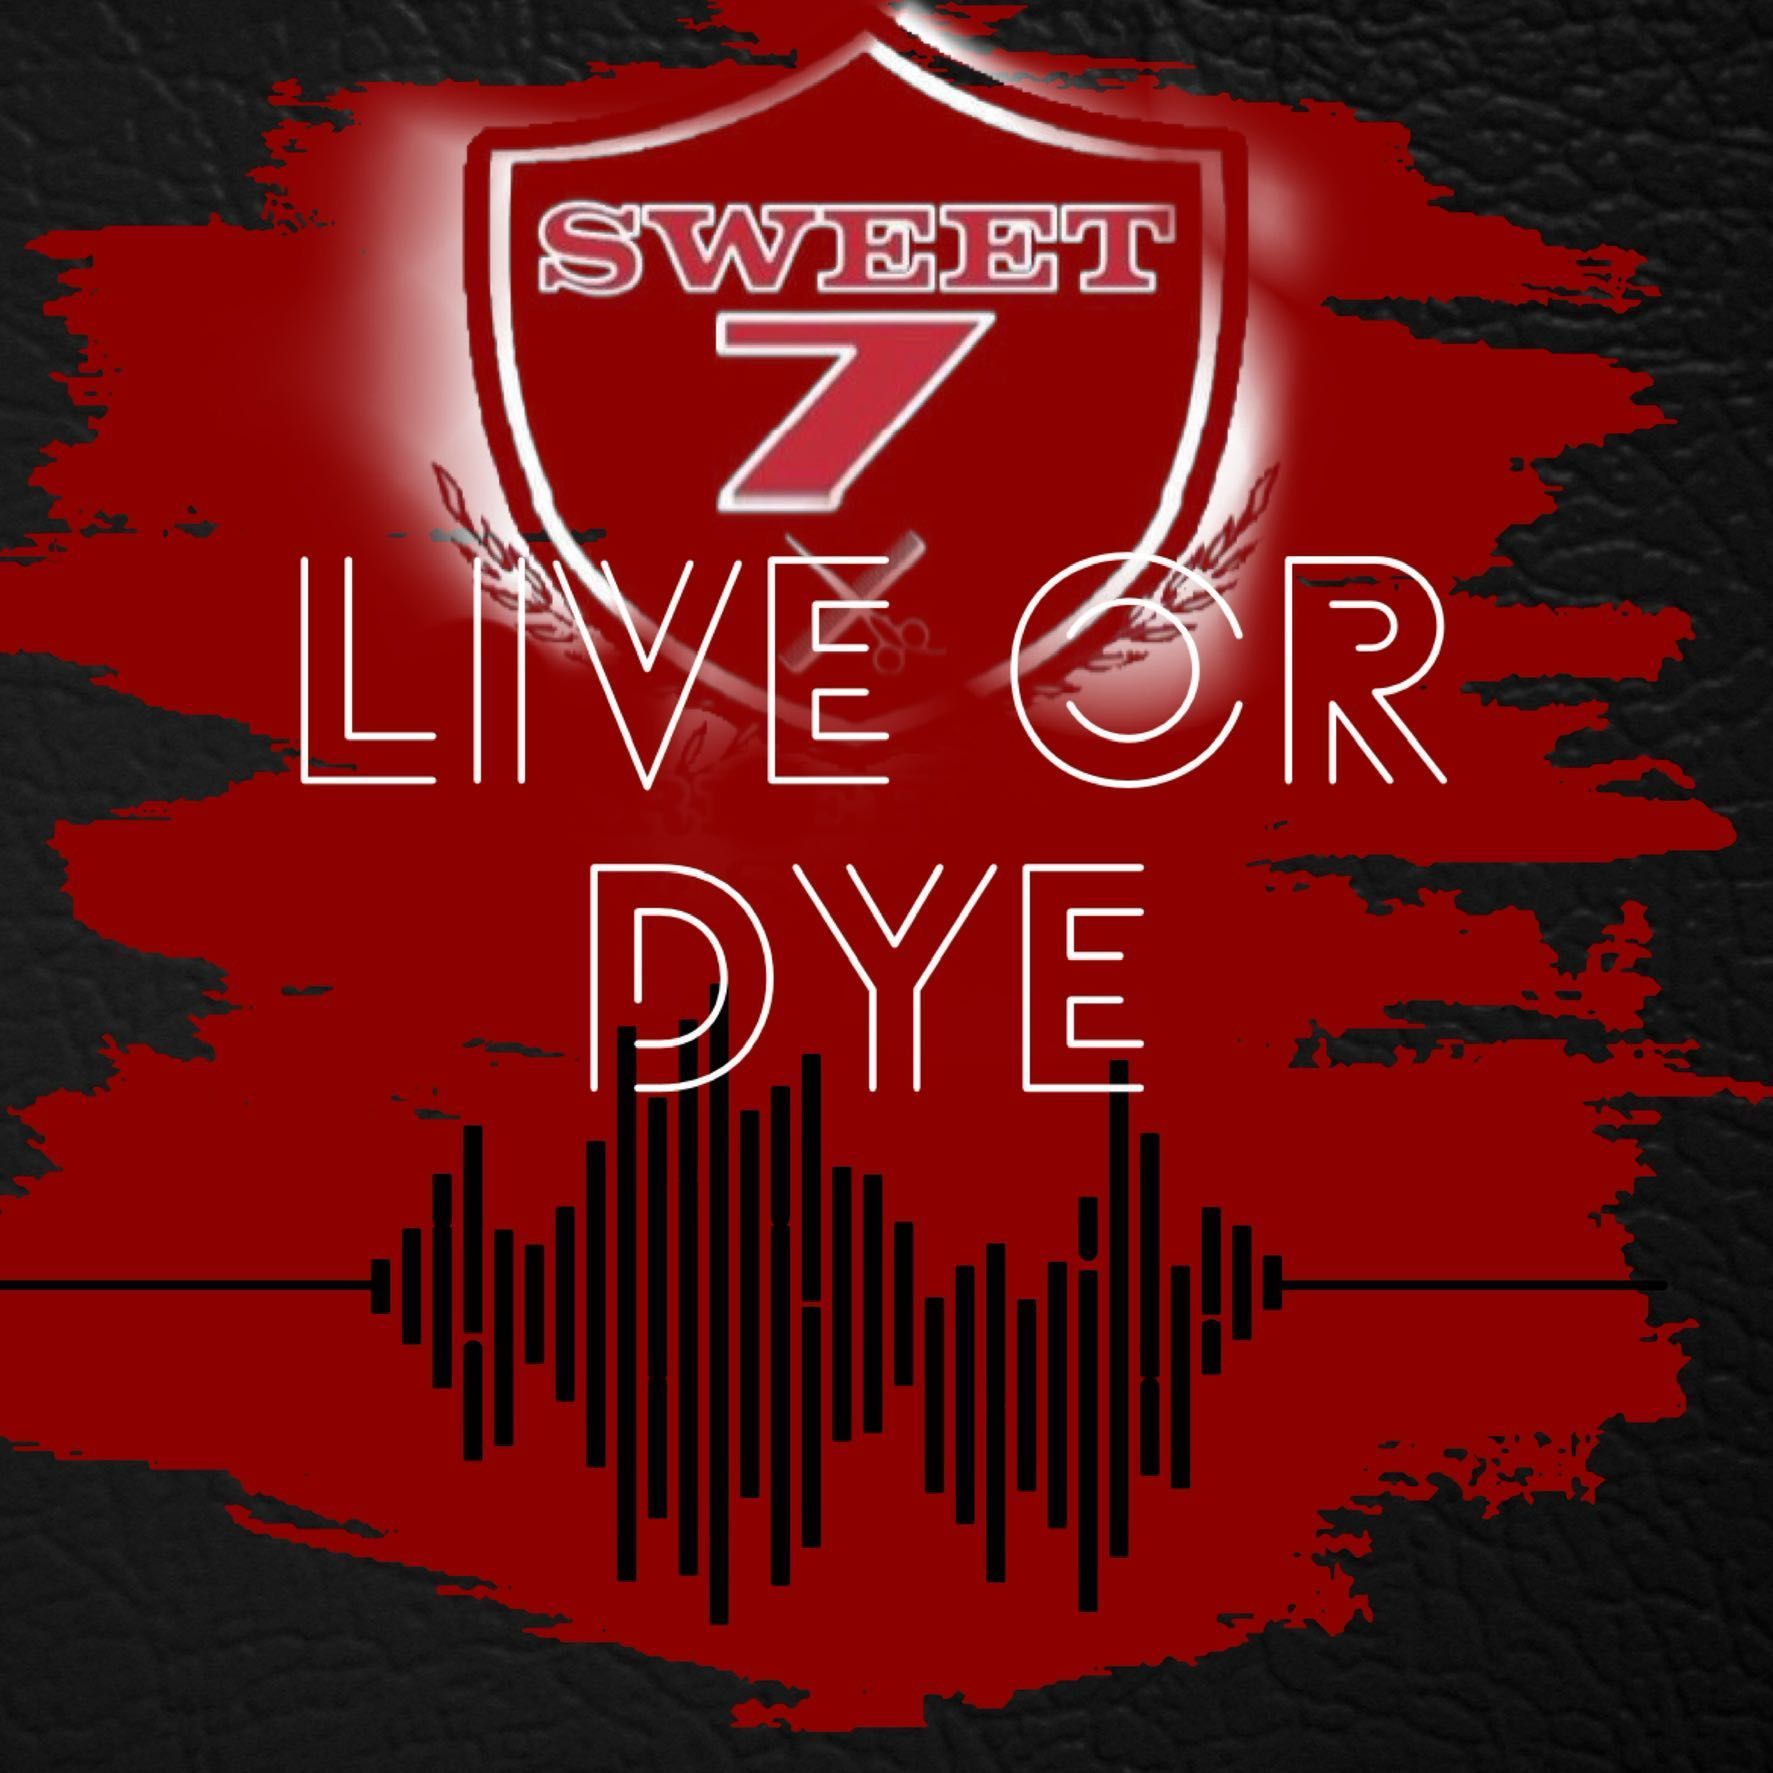 Live or Dye, 1301 50th street, Suite 7, Lubbock, 79412